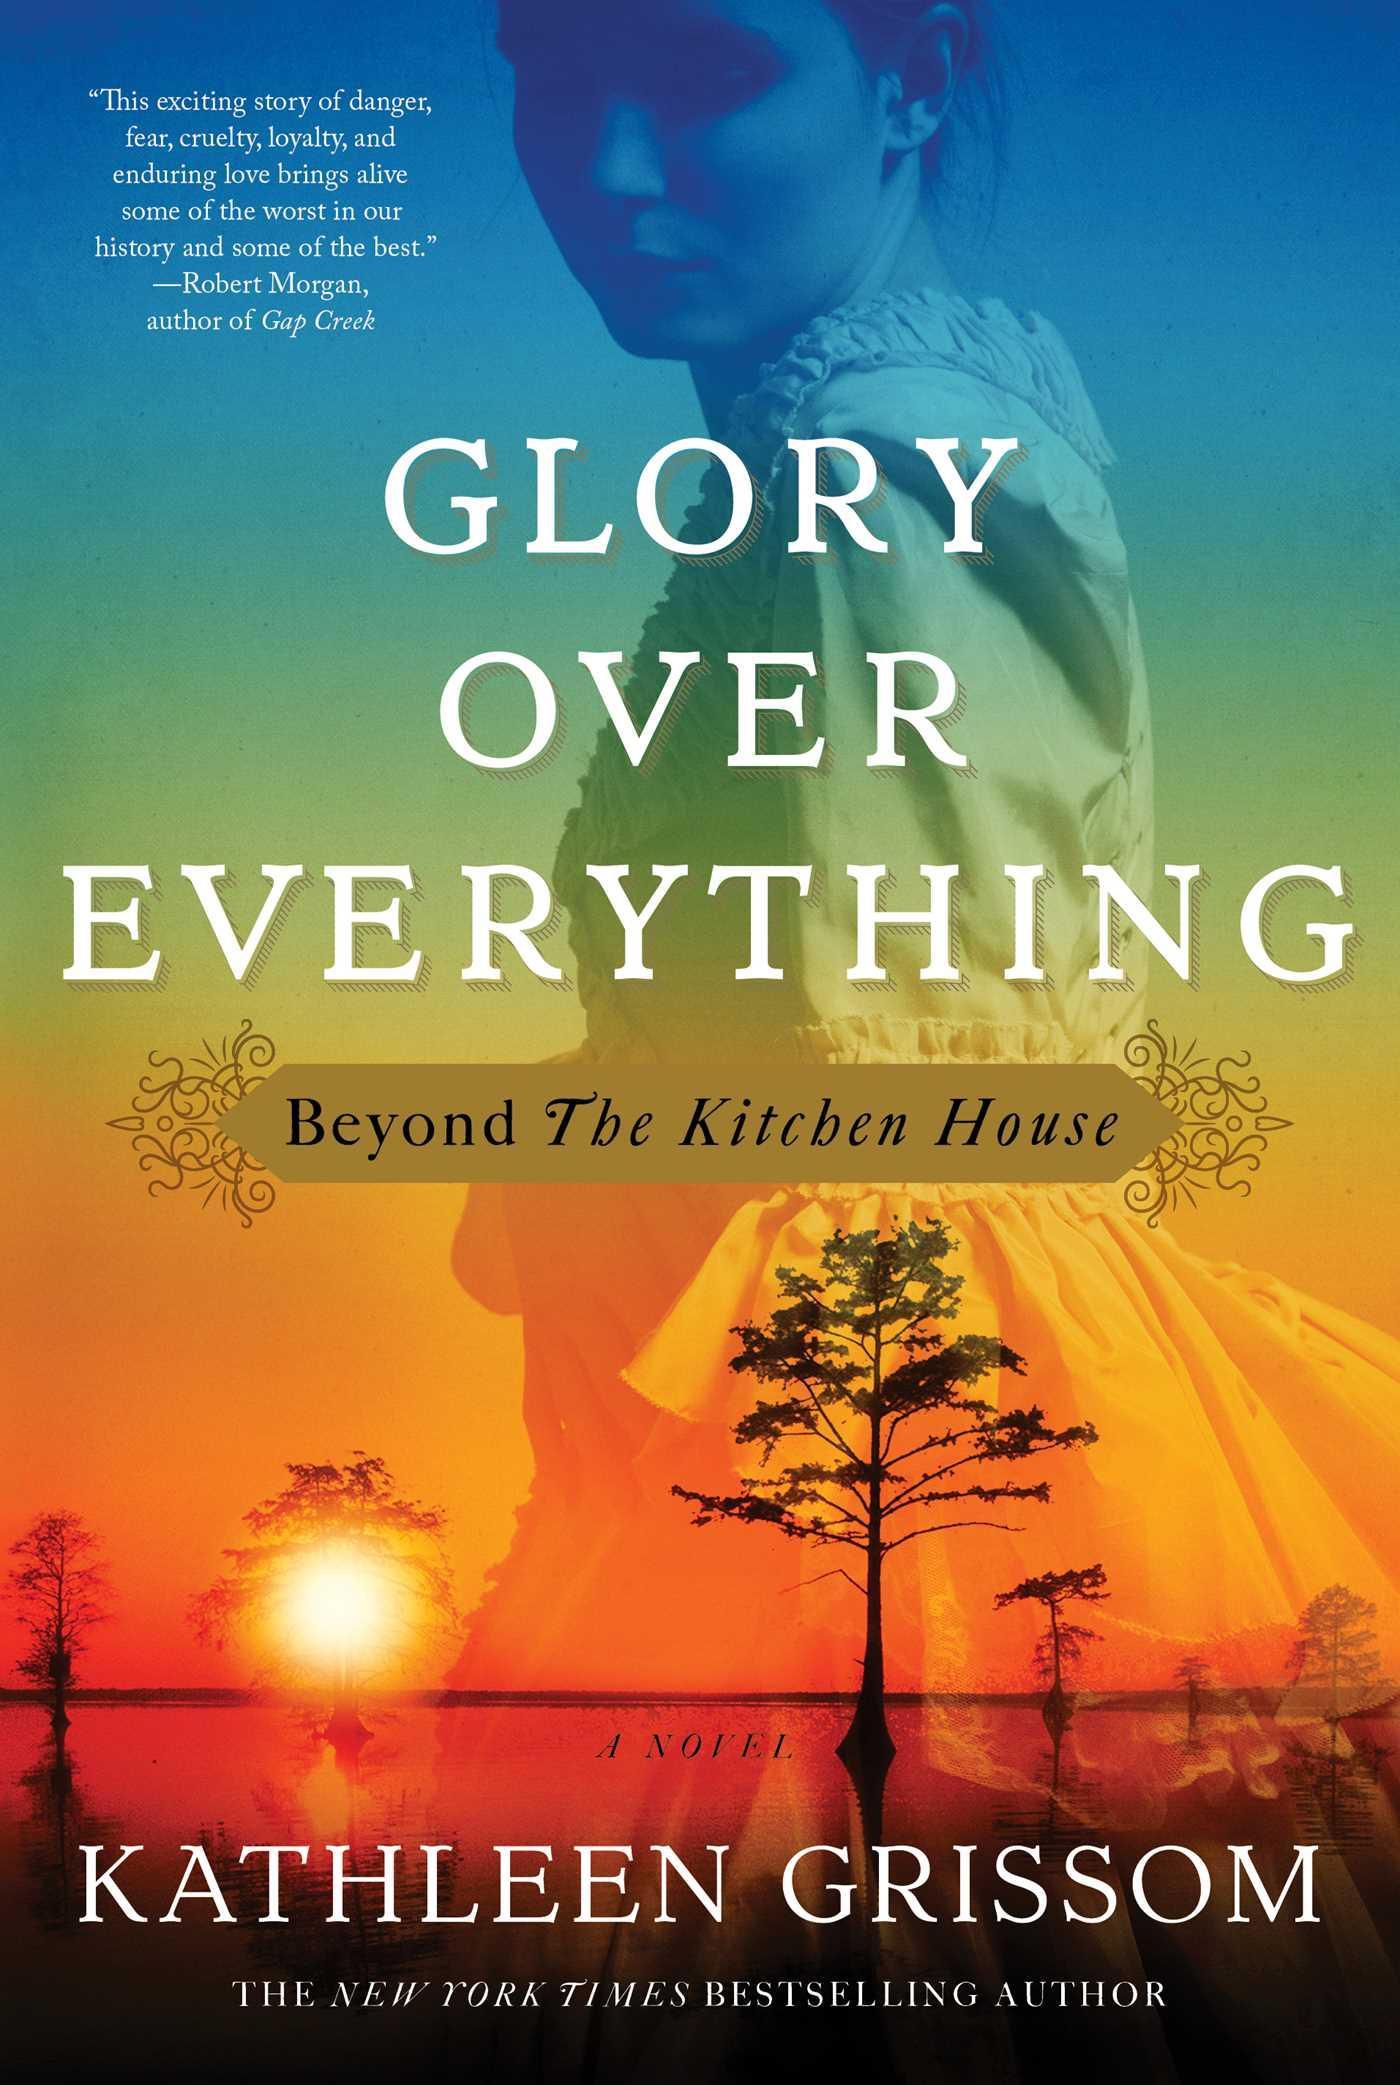 Glory over Everything by Kathleen Grissom book cover